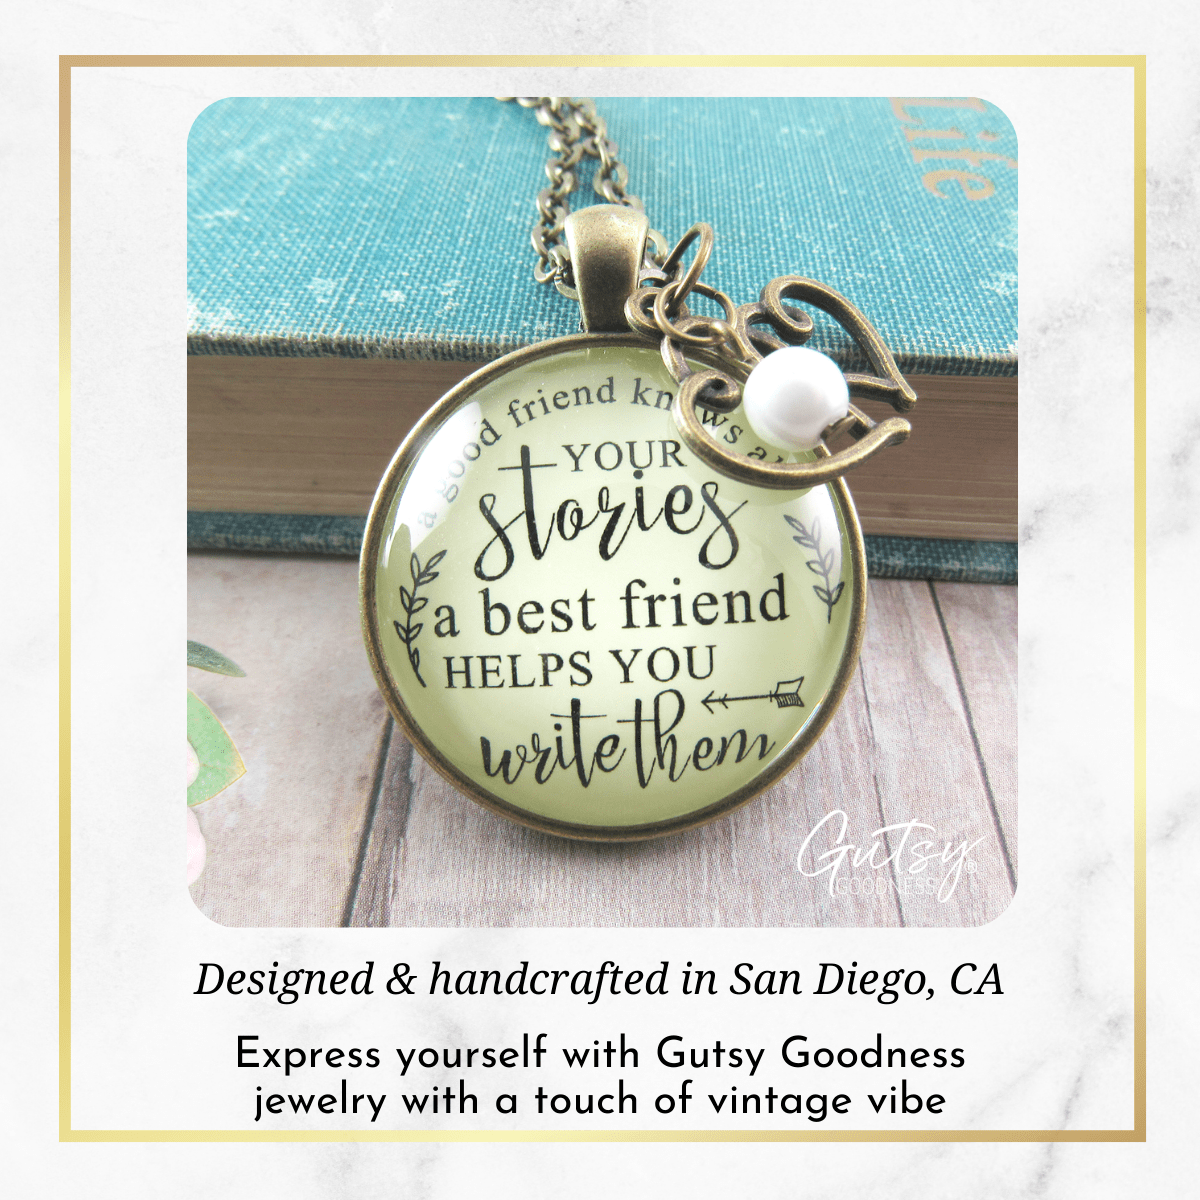 Gutsy Goodness Friendship Necklace She Knows Your Stories Inspiring Jewelry - Gutsy Goodness;Friendship Necklace She Knows Your Stories Inspiring Jewelry - Gutsy Goodness Handmade Jewelry Gifts